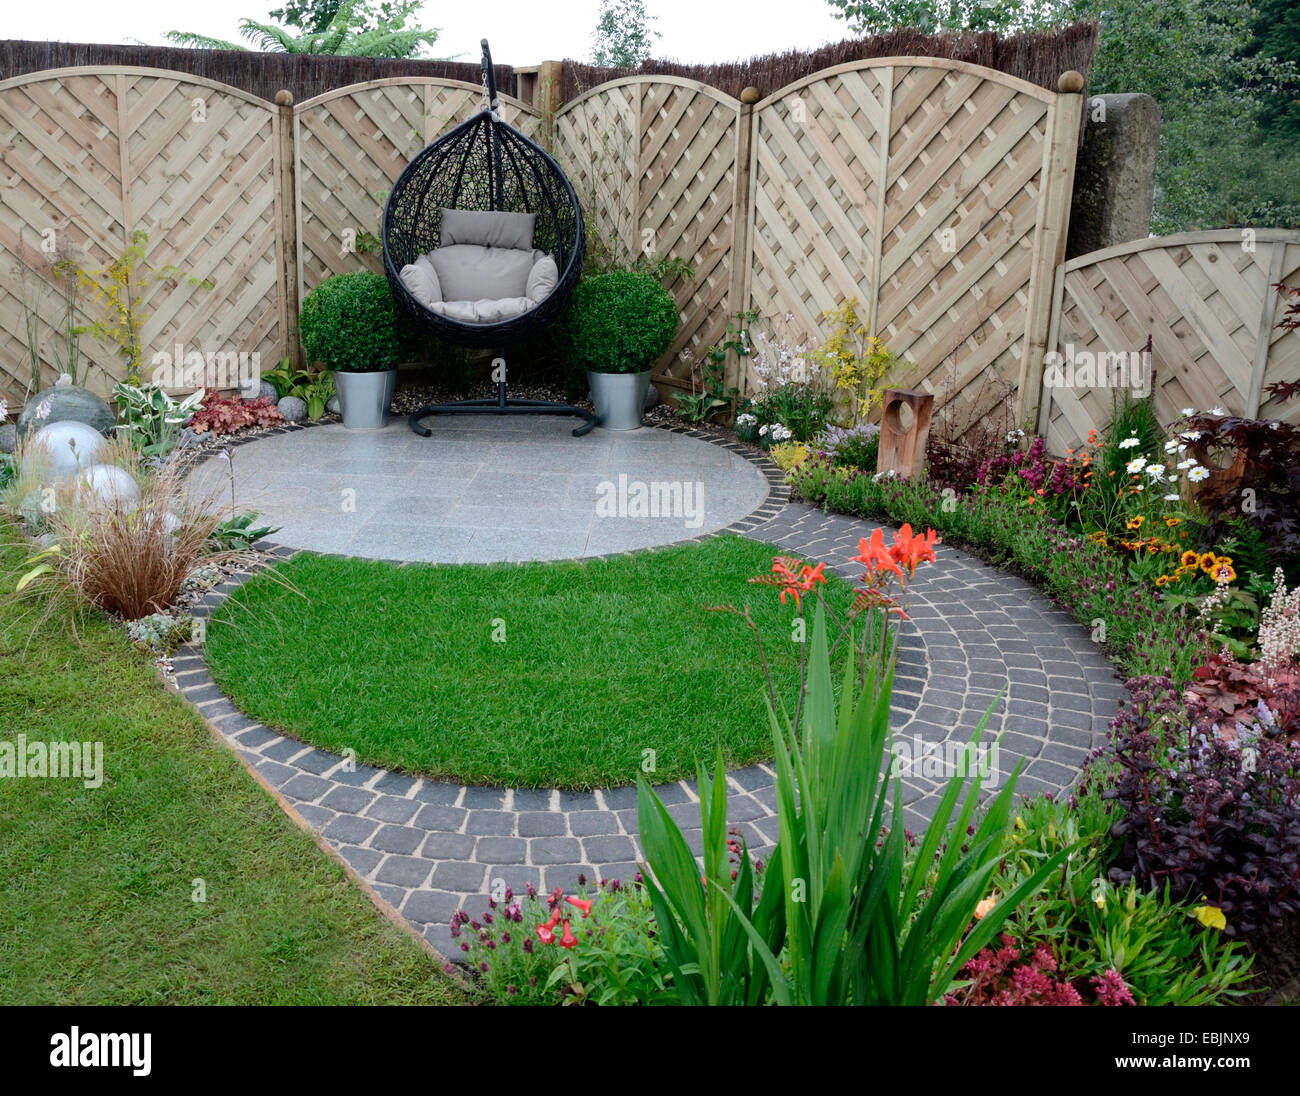 A garden design based on flowing curves around a patio area with a hanging cane chair Stock Photo